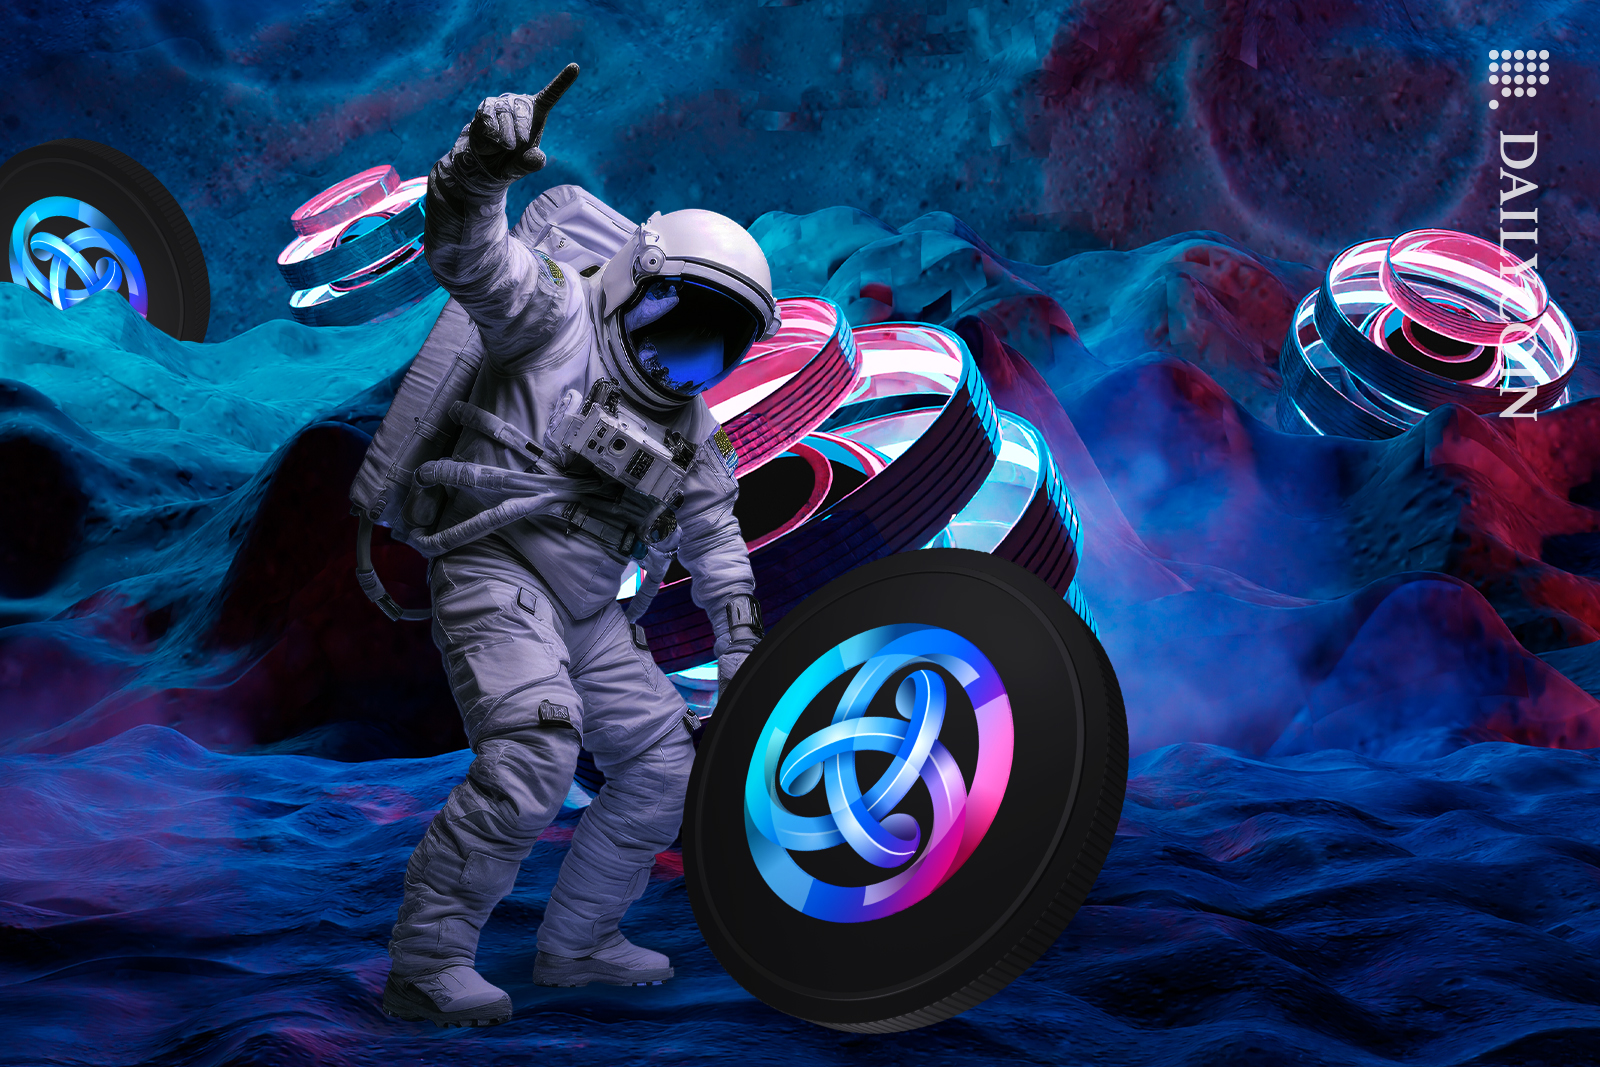 Spaceman showing number one gesture on a different planet net to ASTR coin.